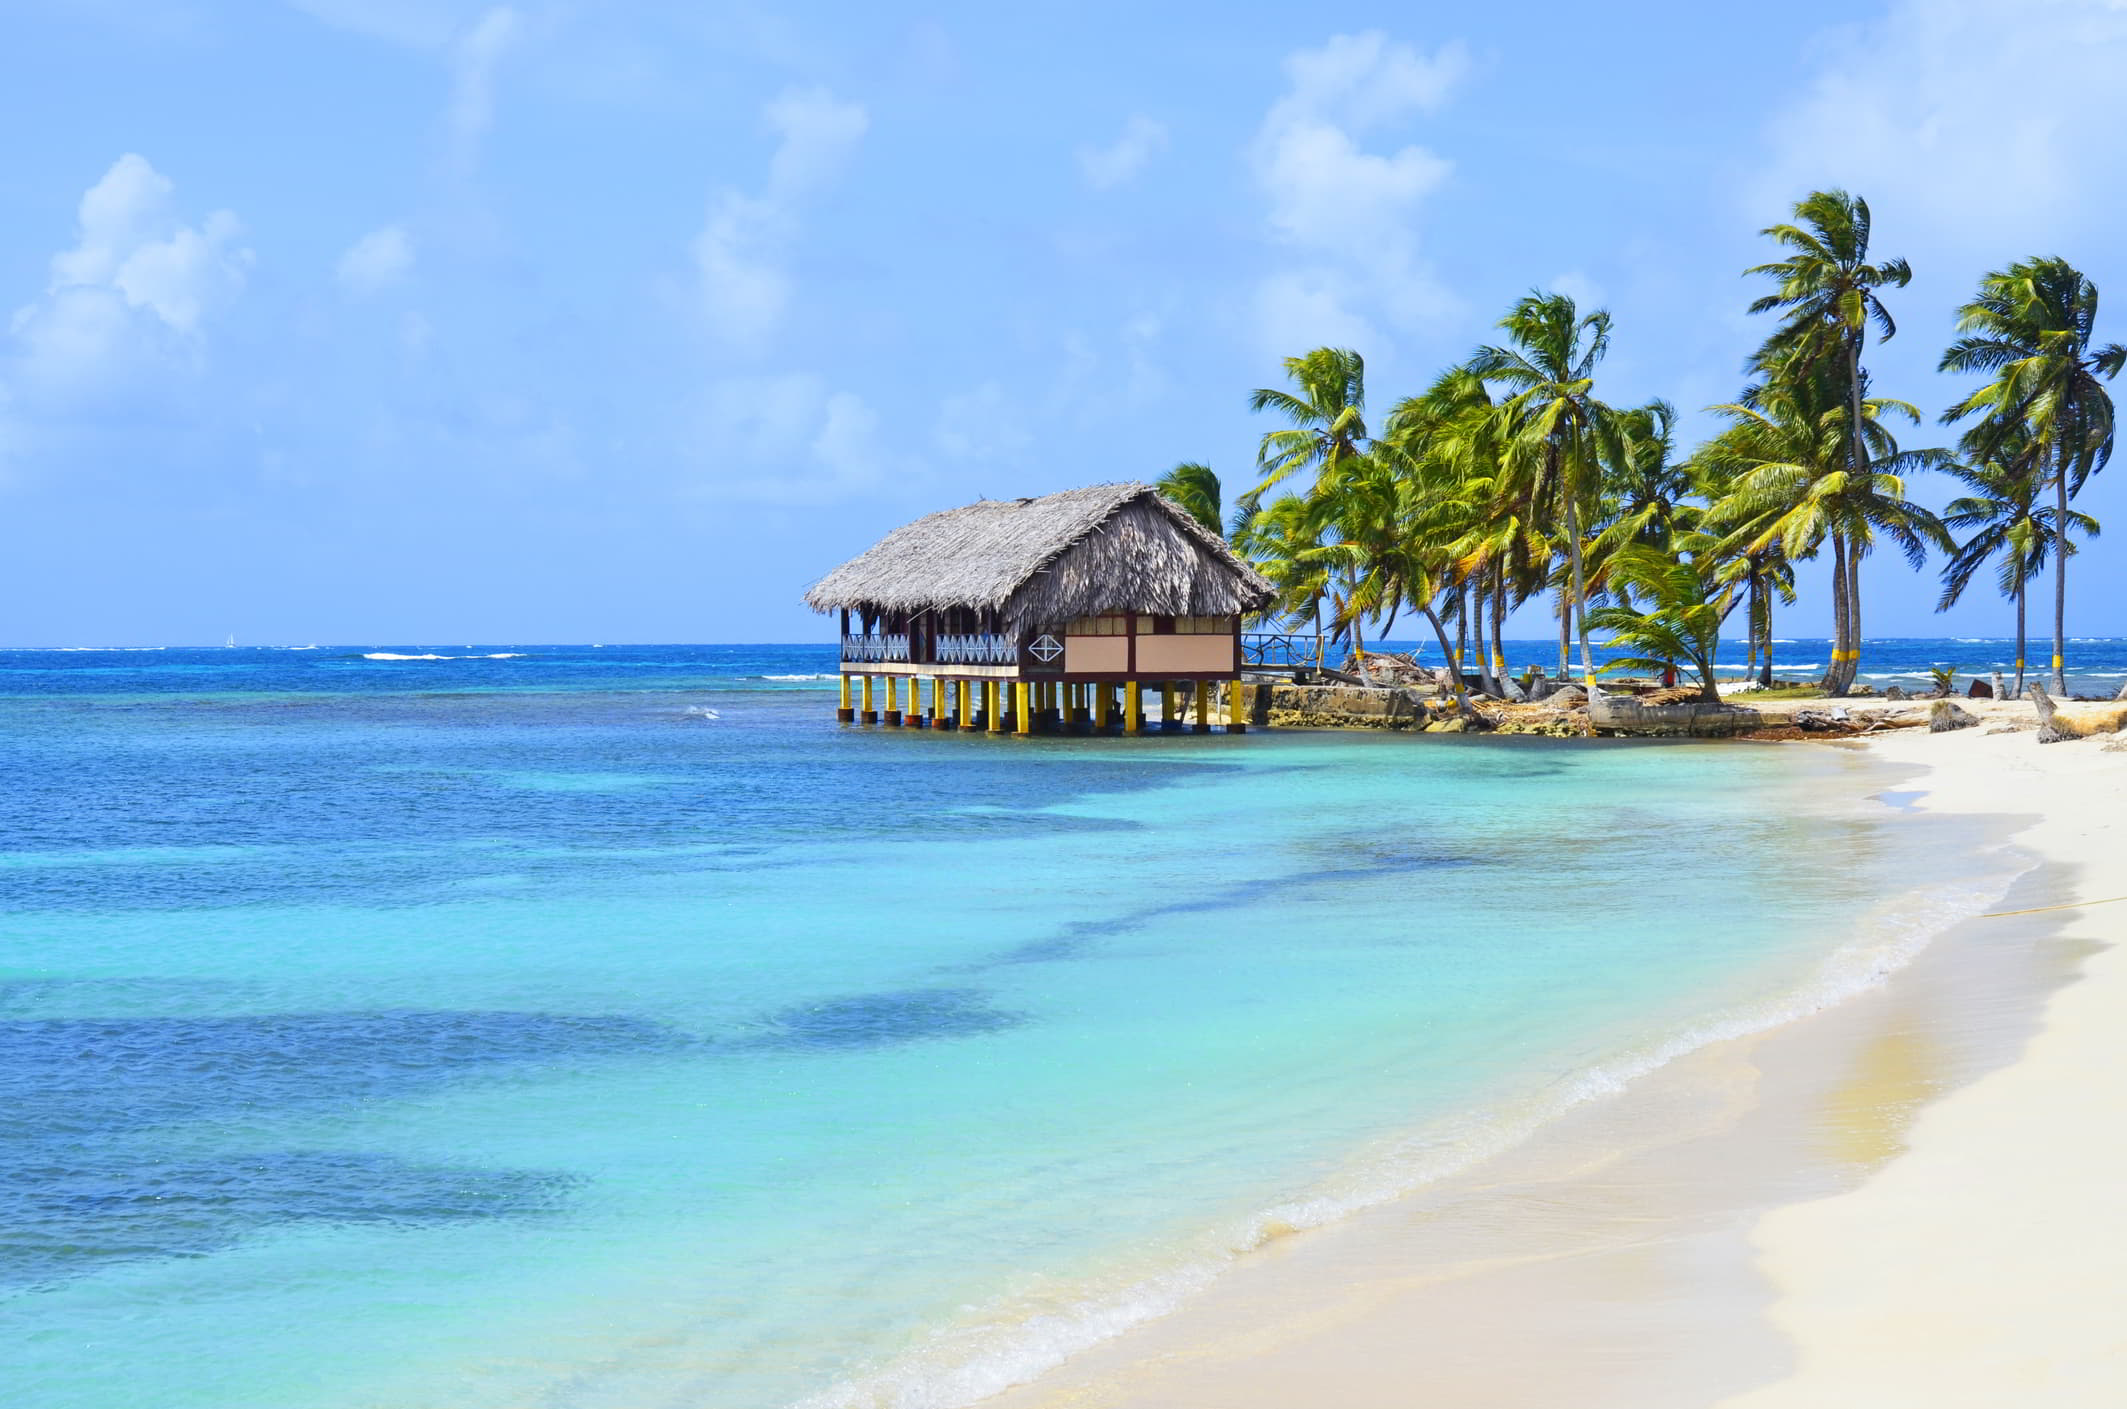 San Blas on a sunny day, blue Caribbean waters and palm trees.